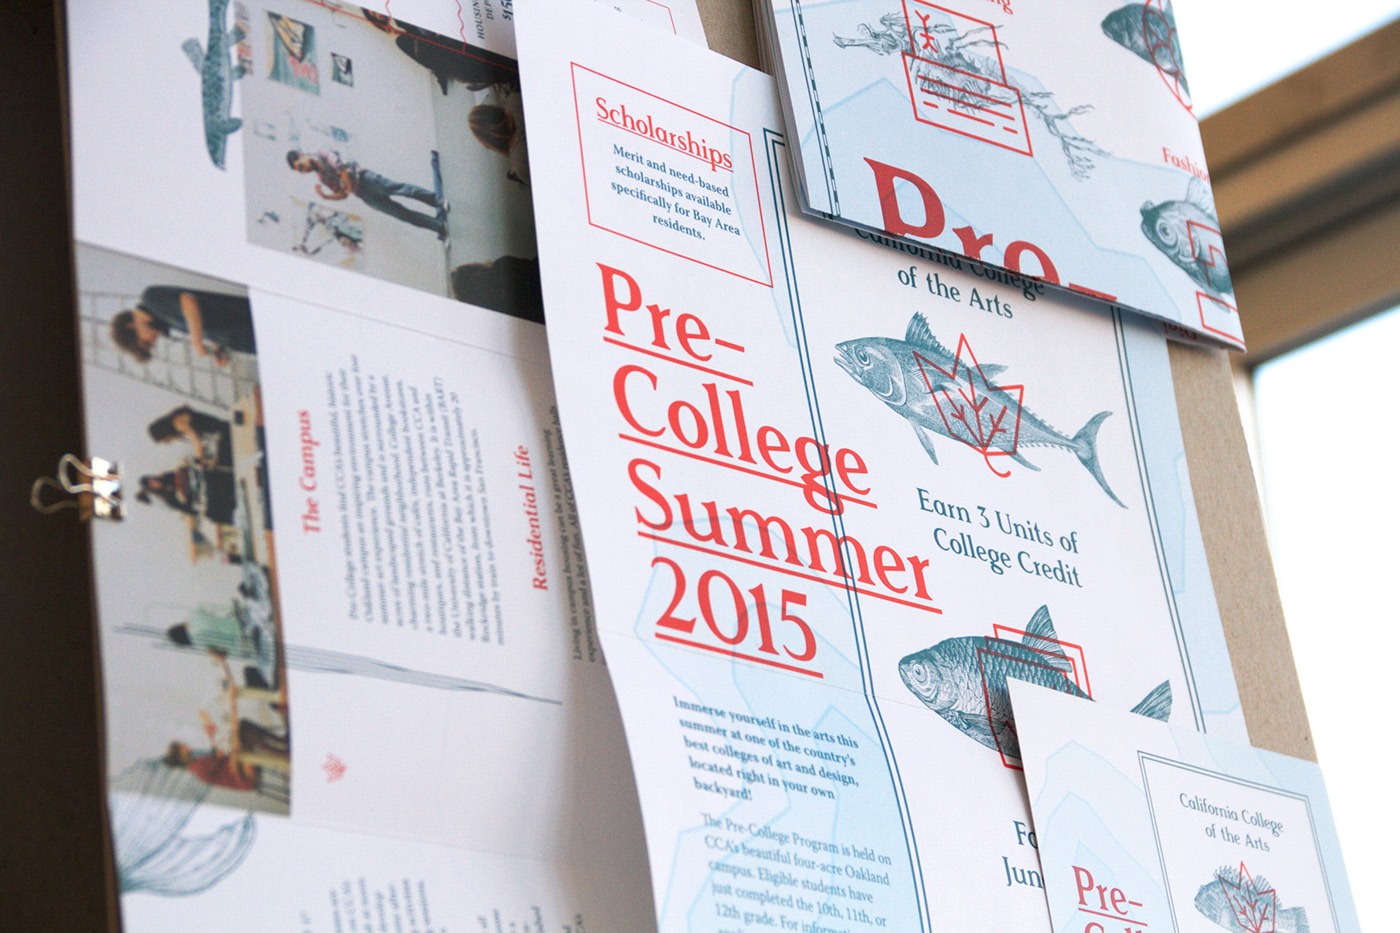 Pre-college High School Education rasmus fish icons set teal red Collateral school California poster postcard brochure